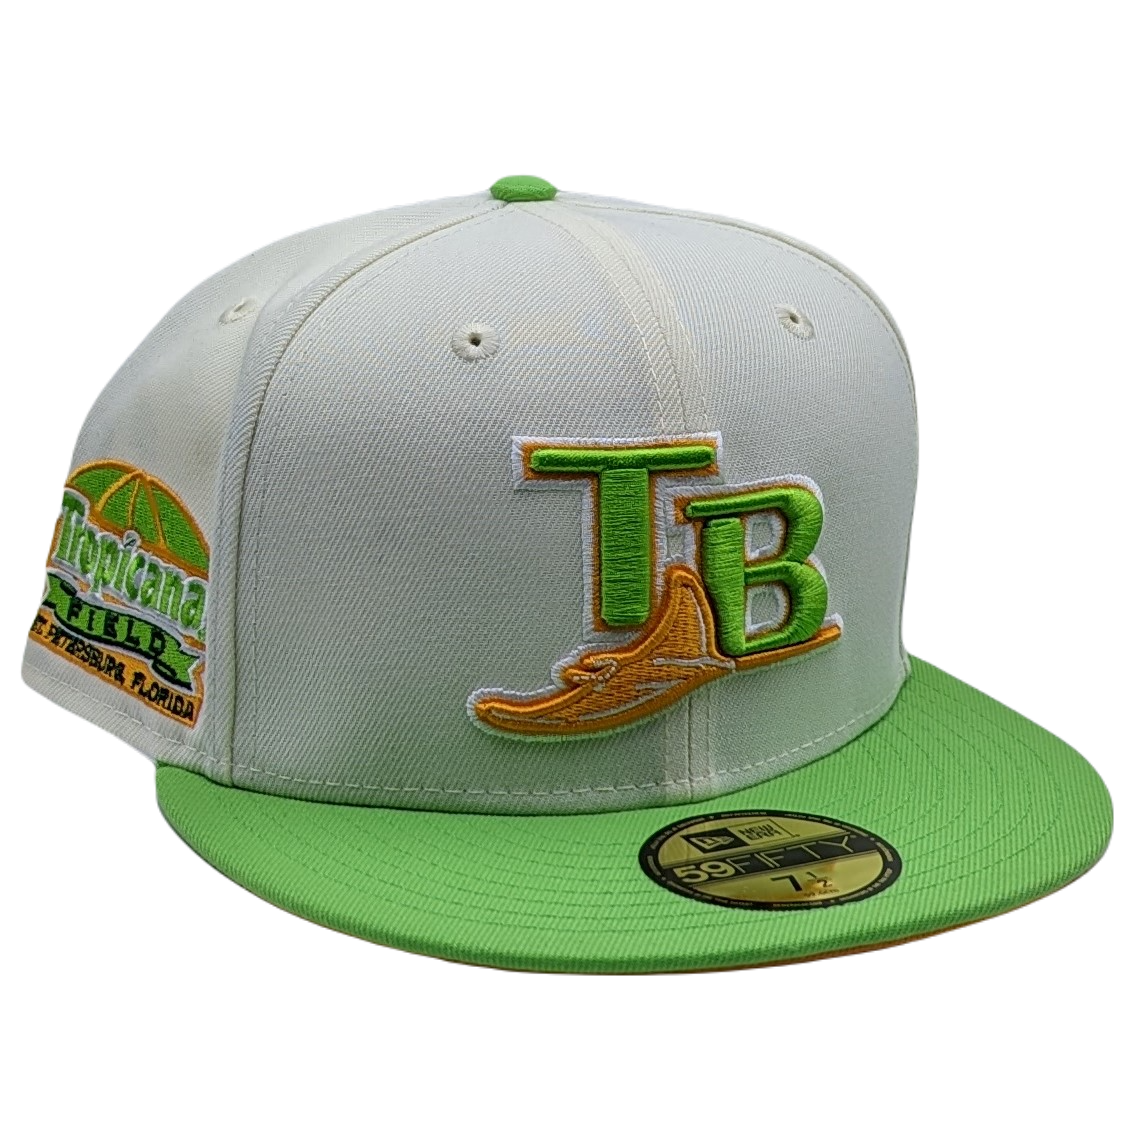 Tampa Bay Devil Rays New Era Hat Corduroy Fitted 7 1/2 Cap USA Tropicana  Patch